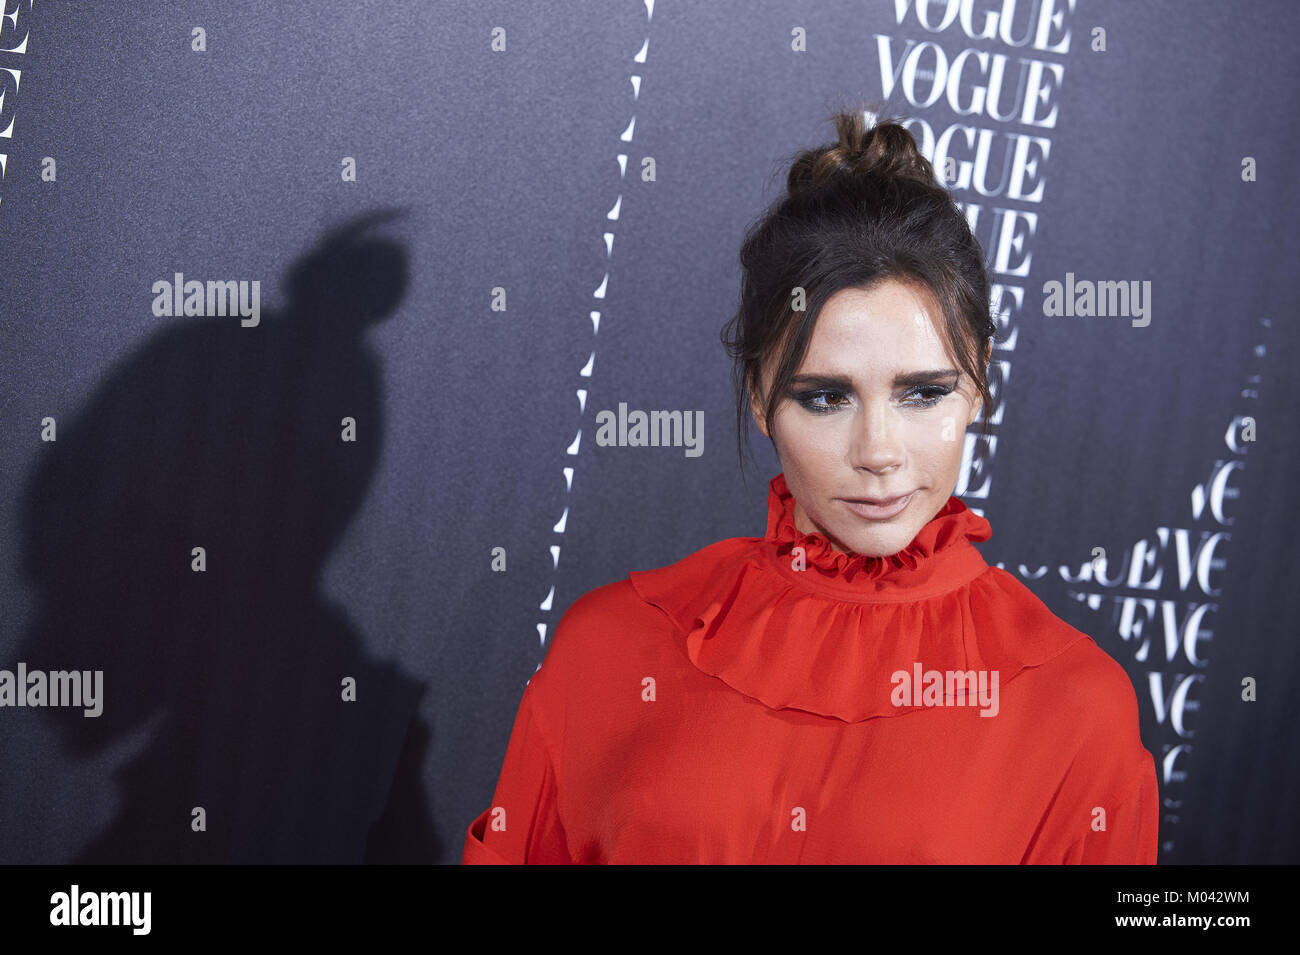 Madrid, Madrid, Spain. 18th Jan, 2018. Victoria Beckham attends a Vogue Spain magazine dinner honouring Victoria Bekcham at Santo Mauro Hotel on January 18, 2018 in Madrid Credit: Jack Abuin/ZUMA Wire/Alamy Live News Stock Photo